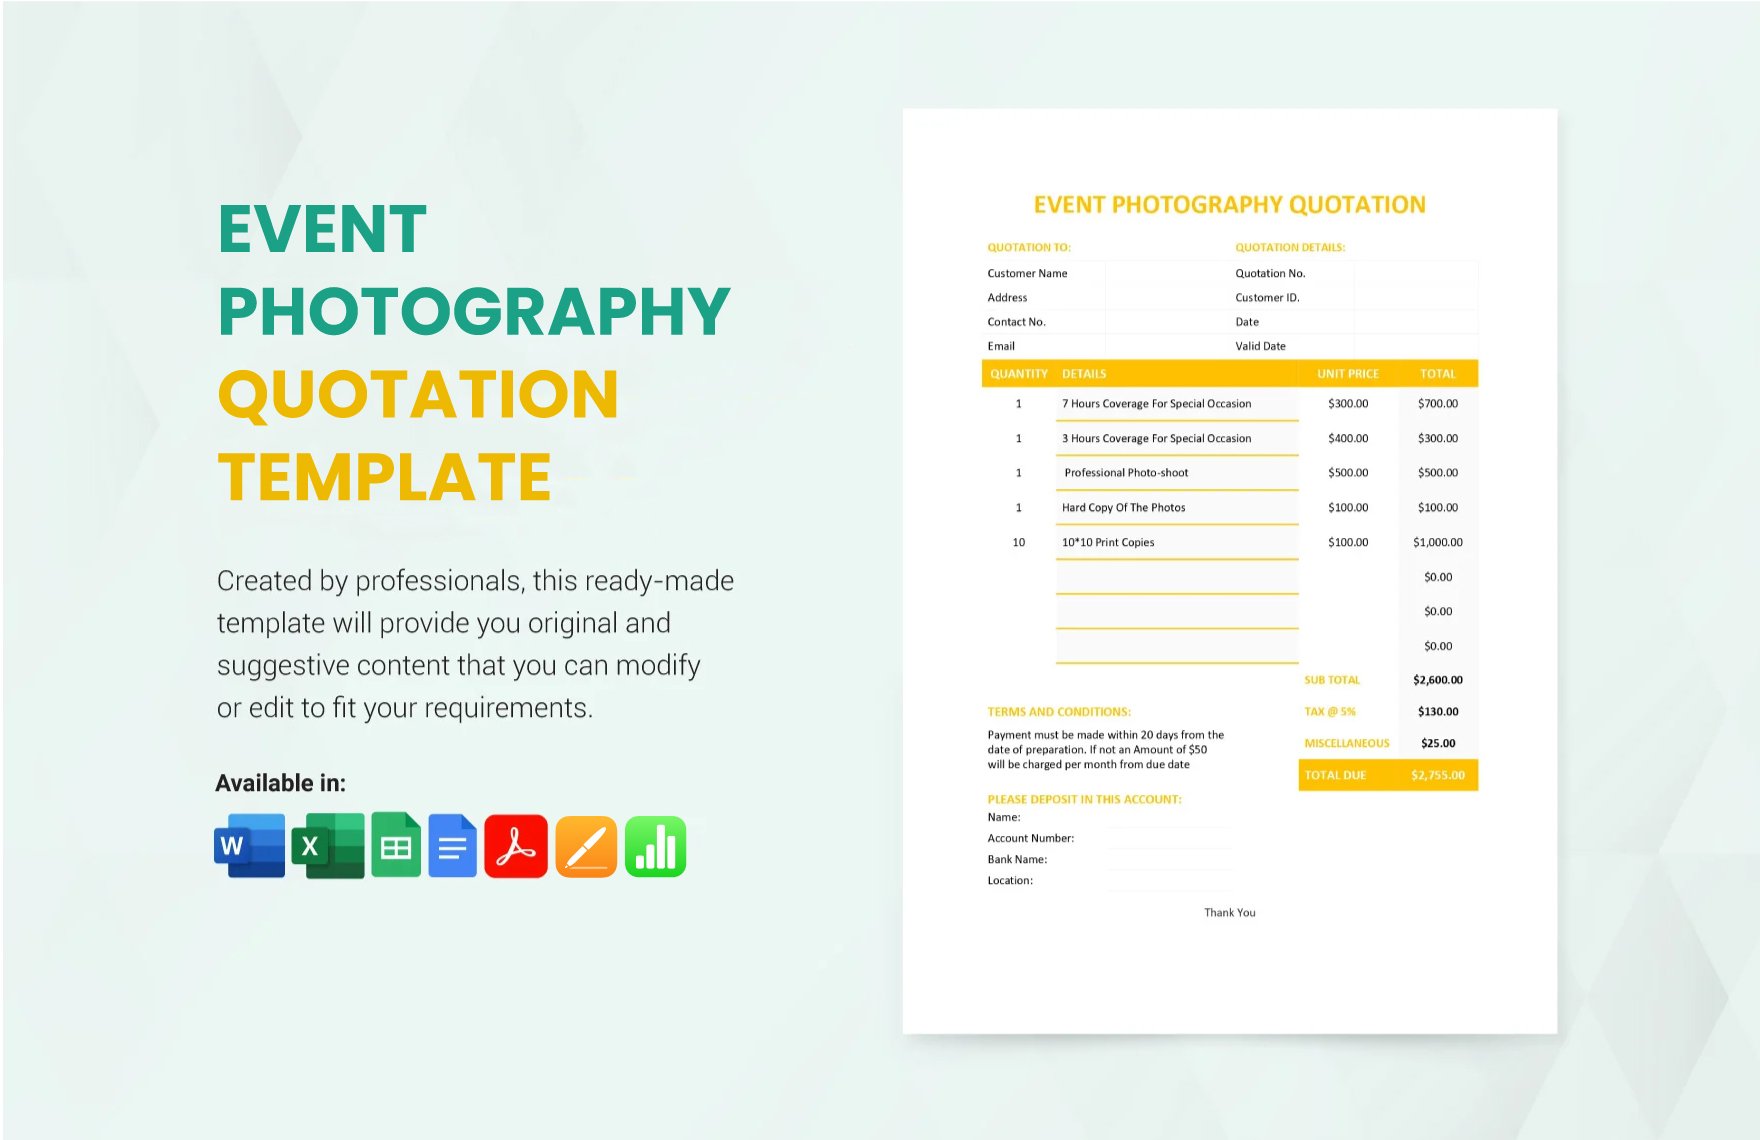 Event Photography Quotation Template